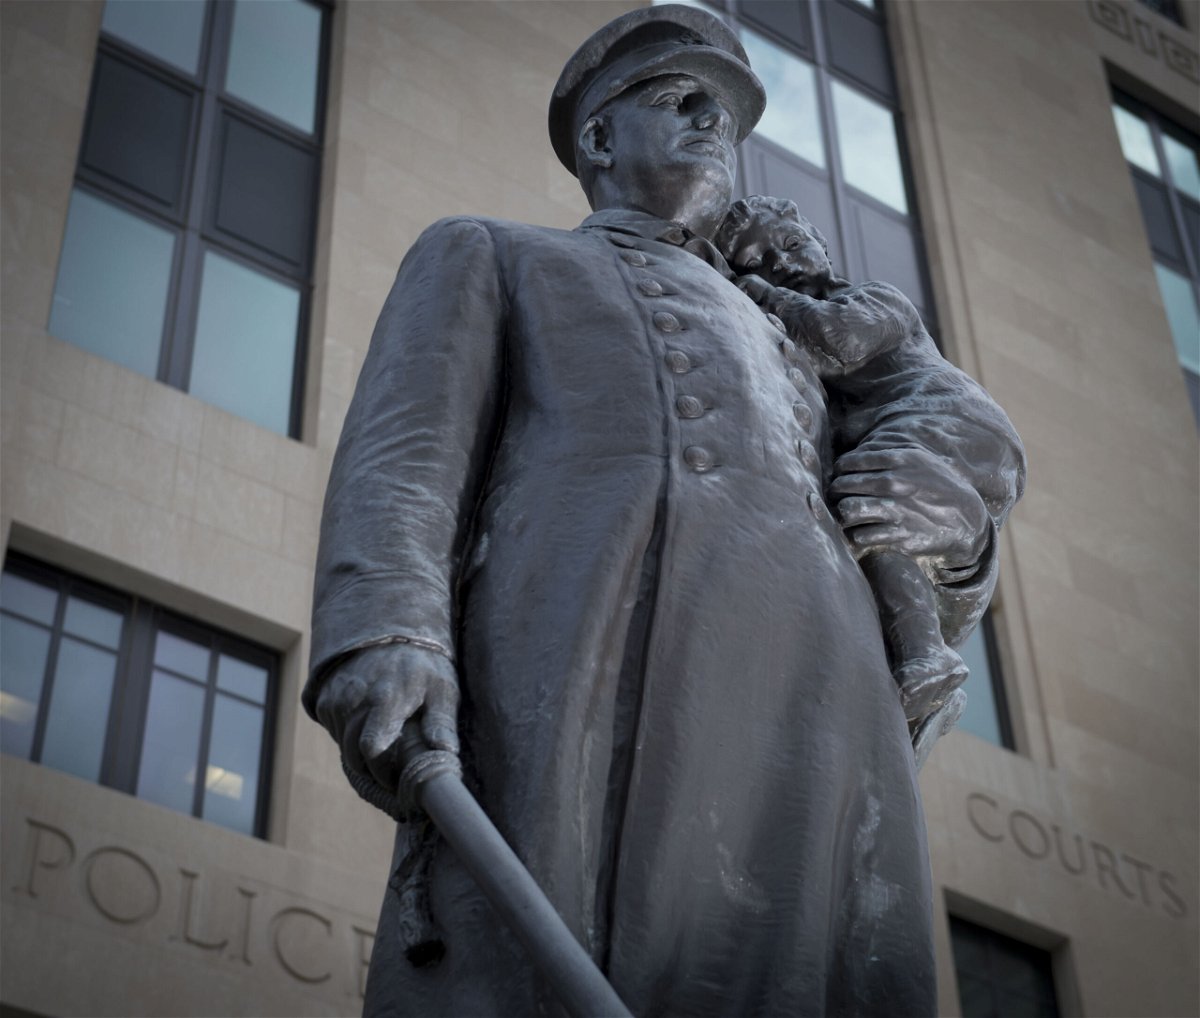 <i>Shane Keyser/Kansas City Star/Tribune News Service/Getty Images</i><br/>The US Department of Justice is investigating whether the Kansas City Police Department in Missouri engaged in a pattern of racial discrimination against Black officers. A statue of a police officer holding a child is pictured here.